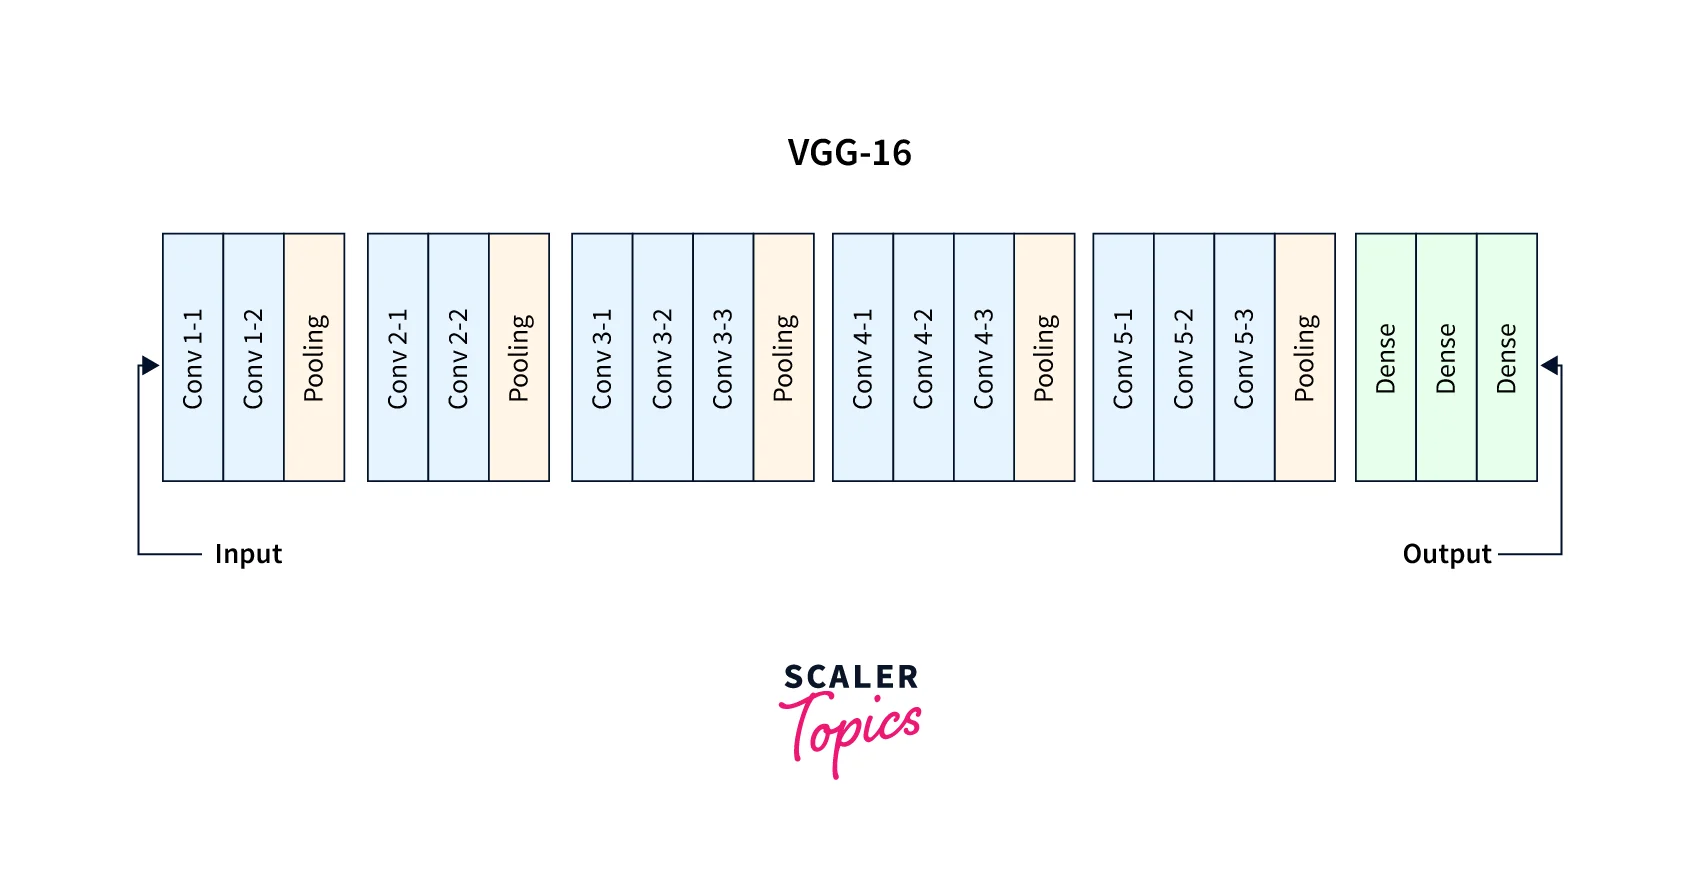 model architecture of vgg network